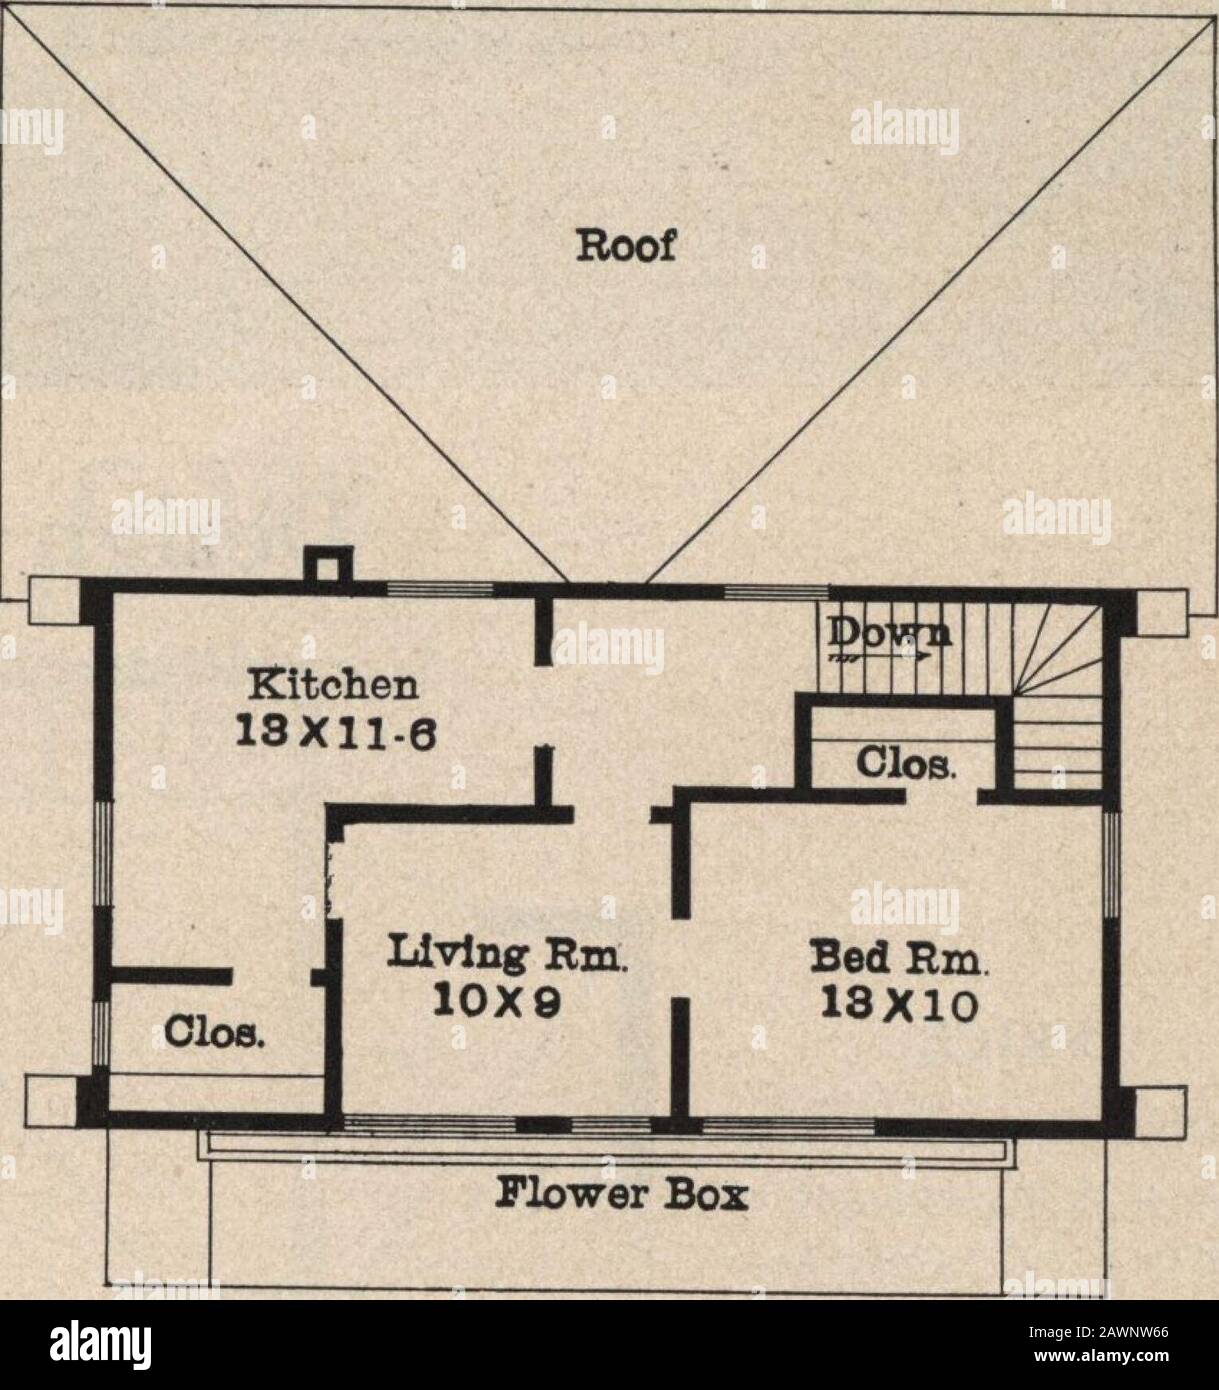 Radford S Garages And How To Build Them First Floor Plan Blue